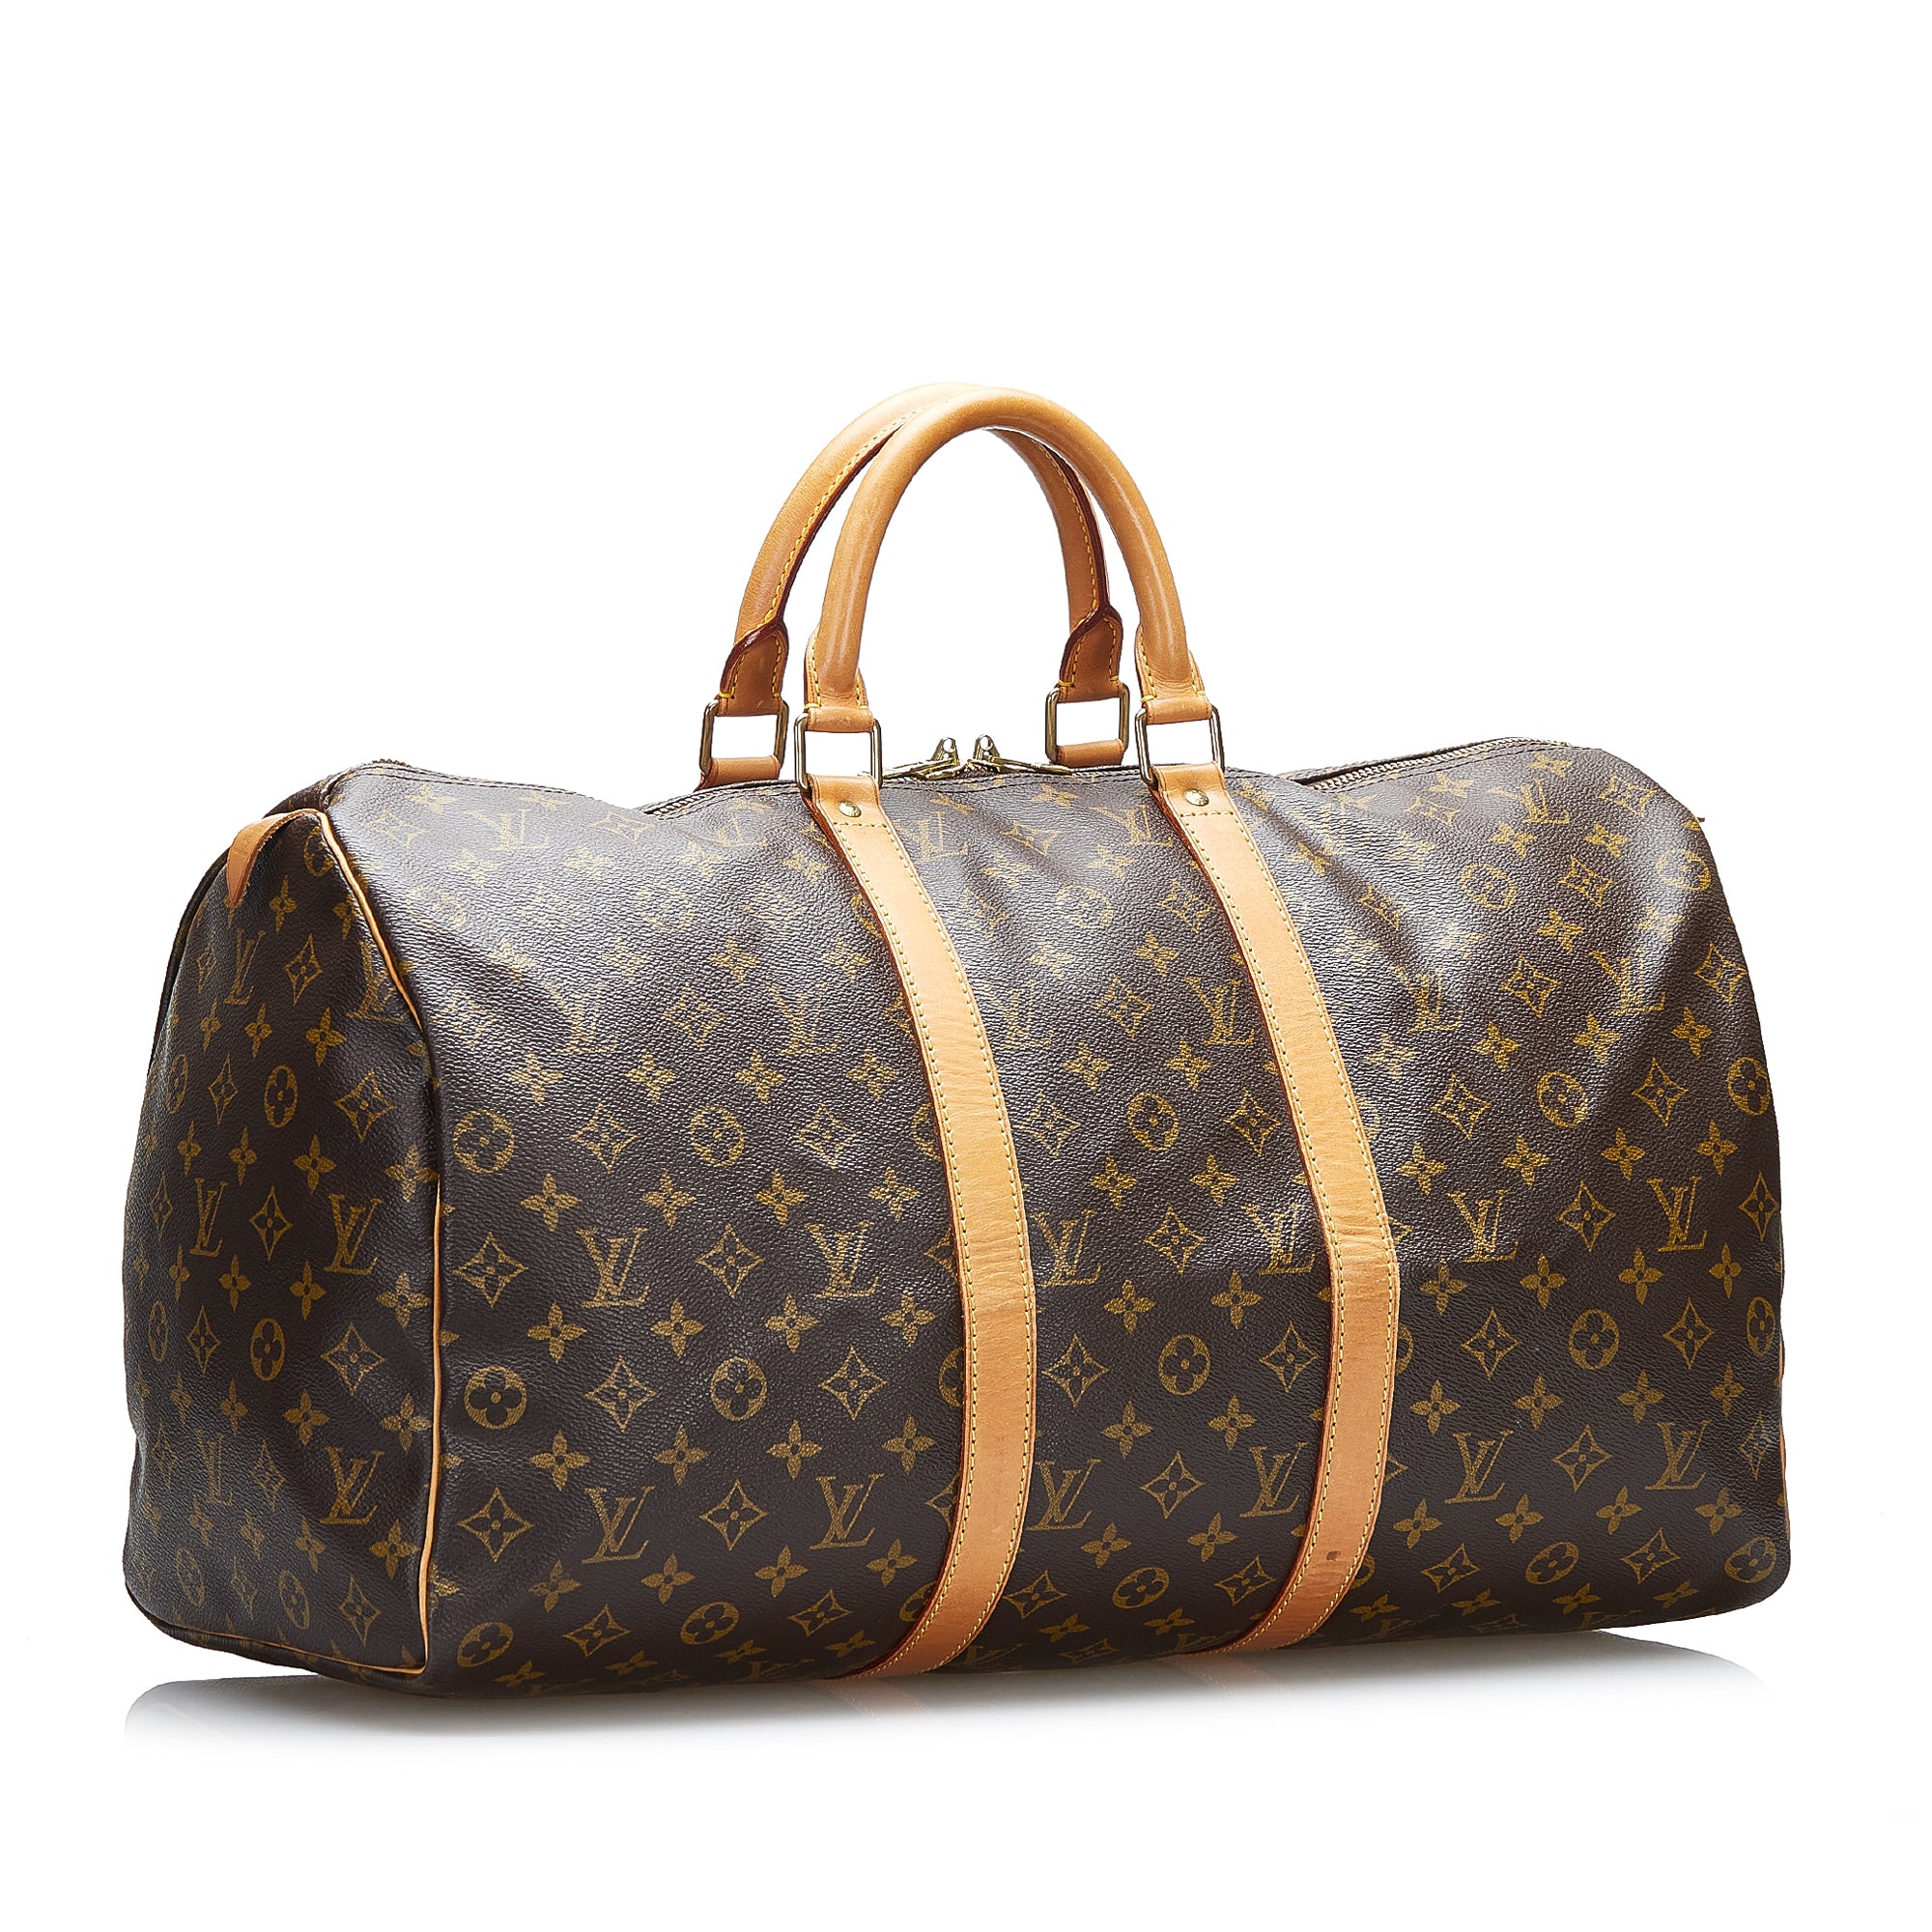 Shop for Louis Vuitton Monogram Canvas Leather Keepall 50 cm Duffle Bag  Luggage - Shipped from USA